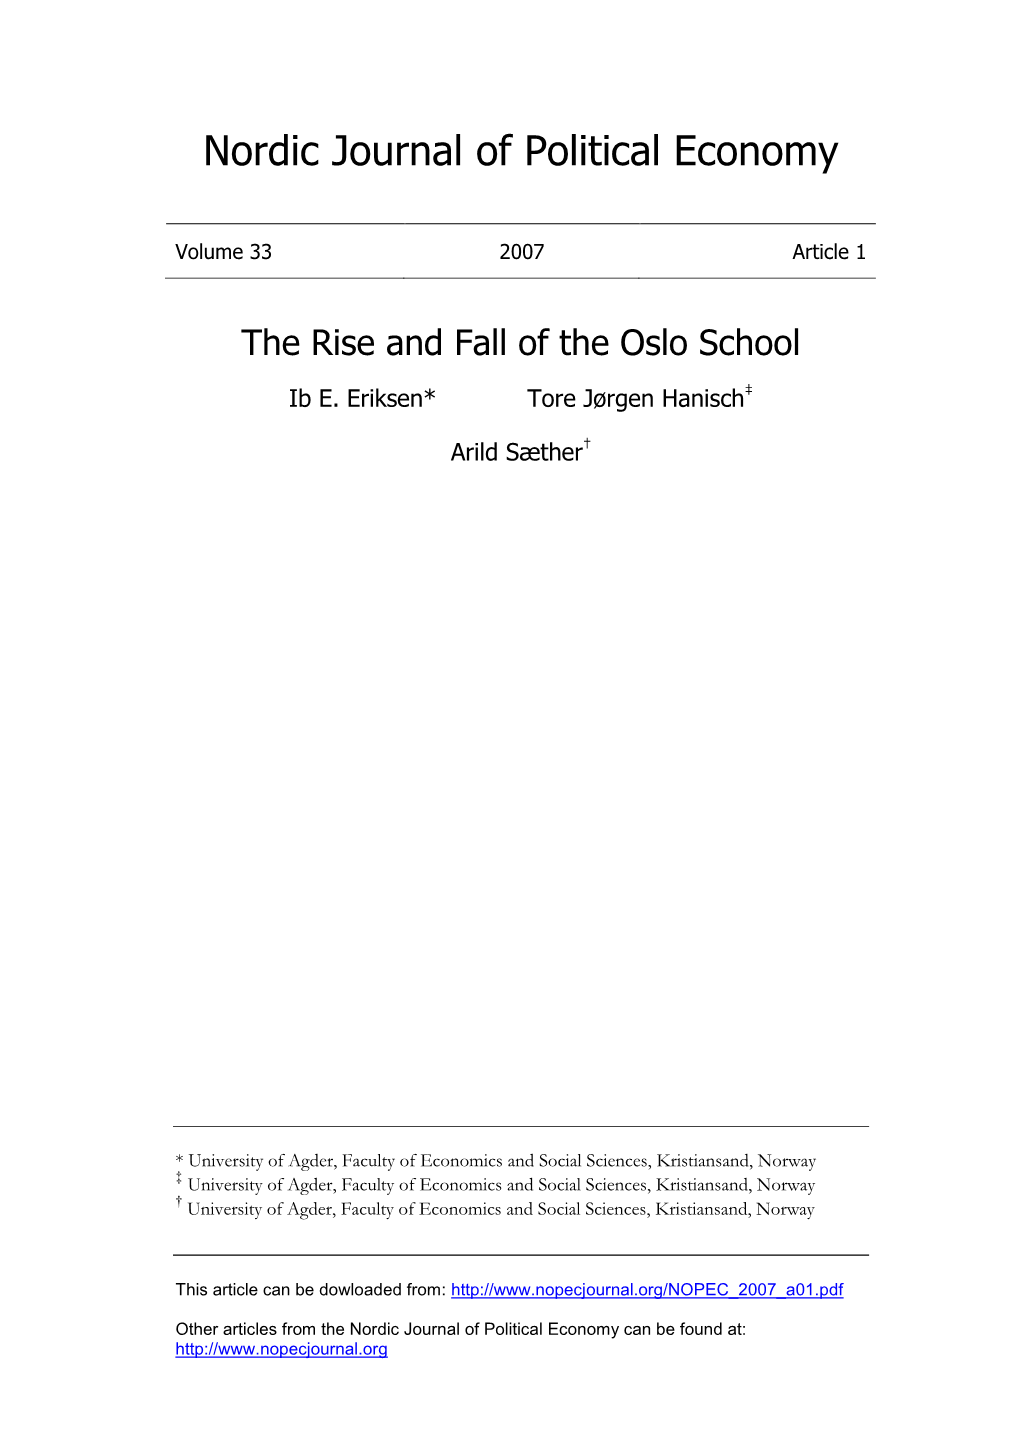 The Rise and Fall of the Oslo School